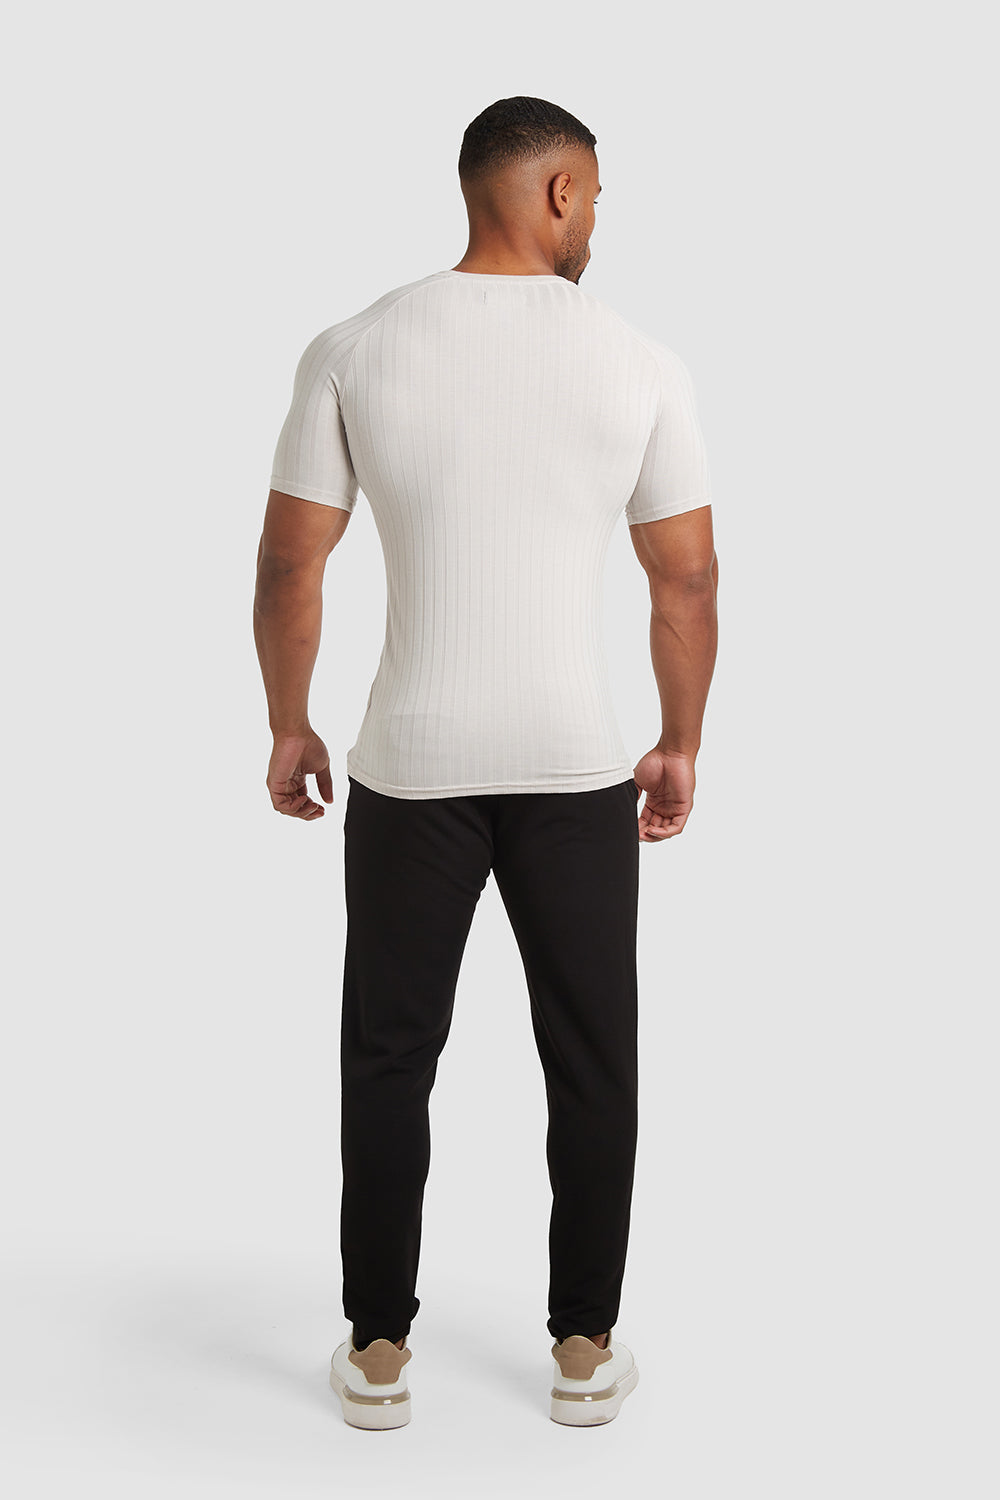 Ribbed Long Sleeve Polo in Truffle - TAILORED ATHLETE - USA